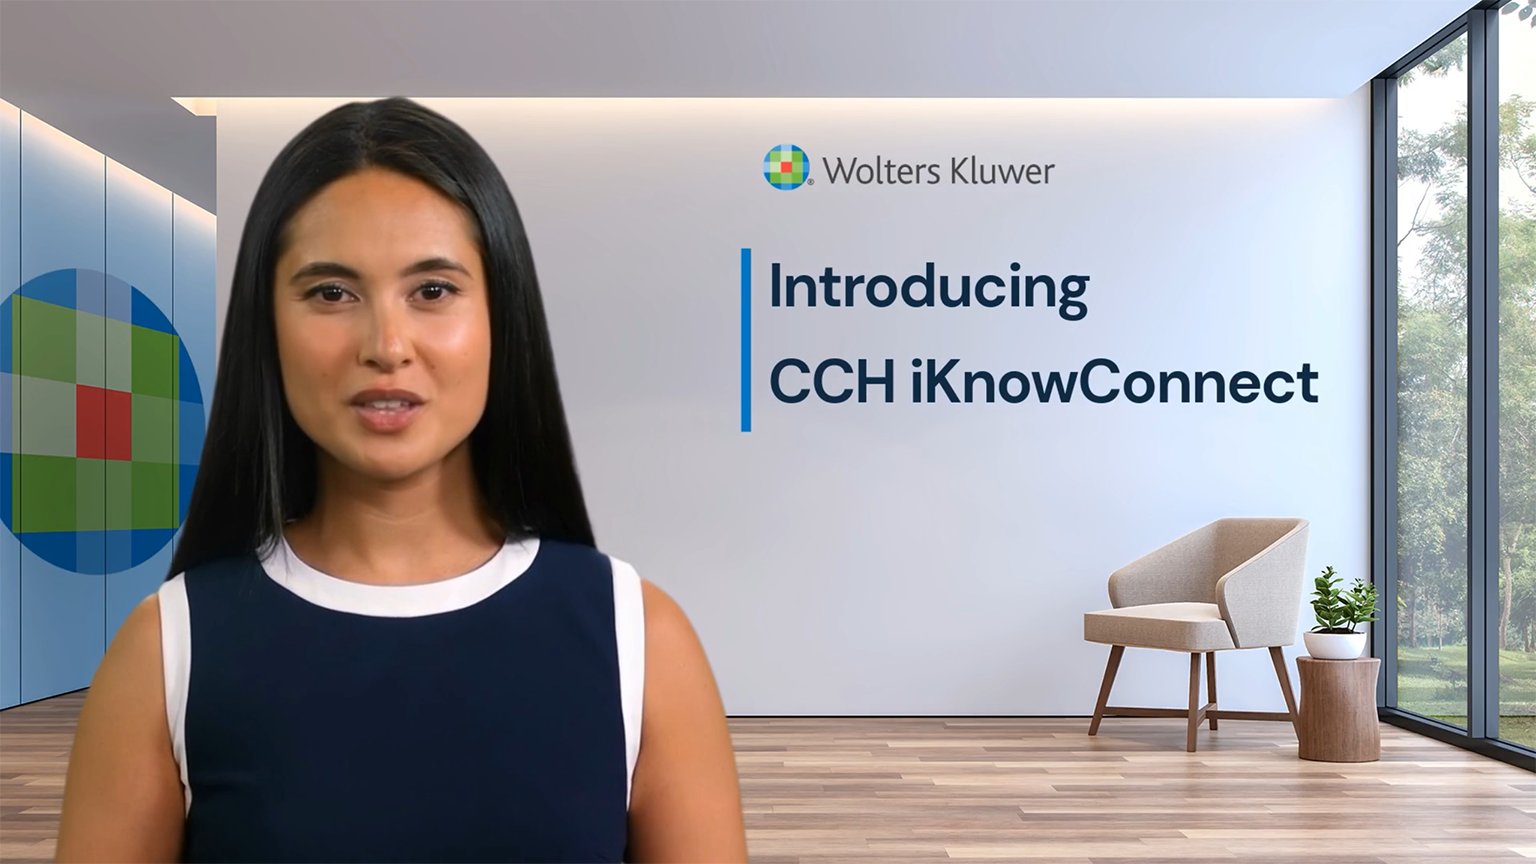 Screenshot of Introducing CCH iKnowConnect video